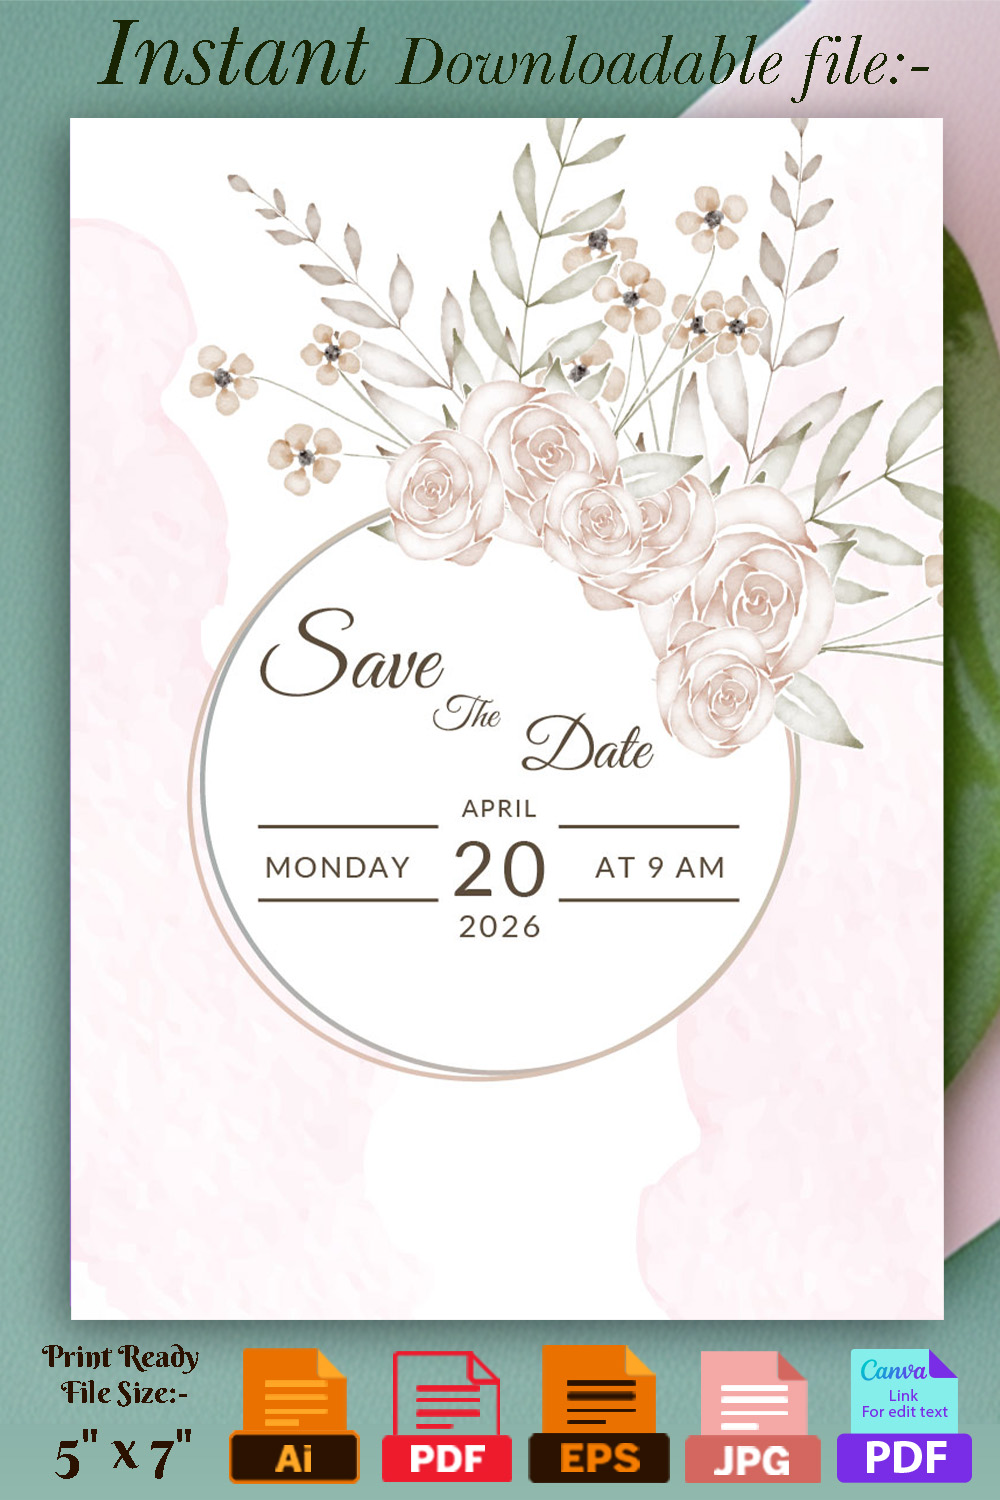 Image with beautiful wedding invitation with flowers.